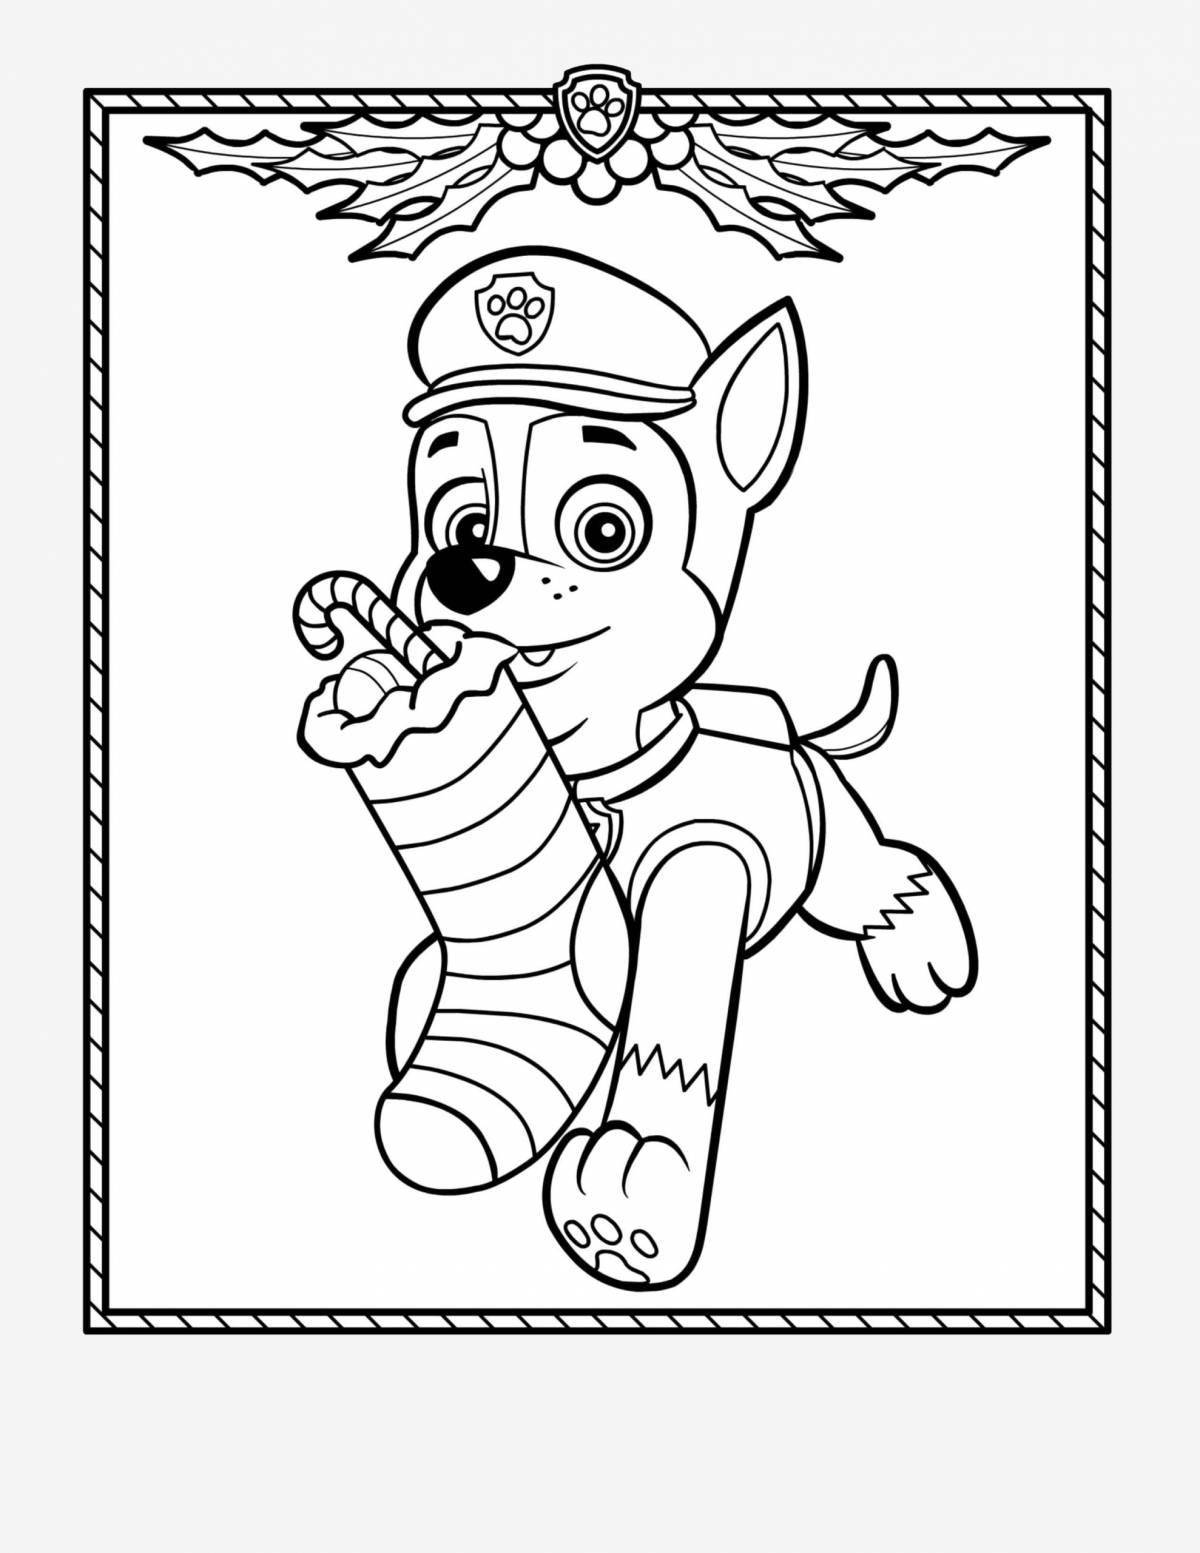 Exciting paw patrol racer